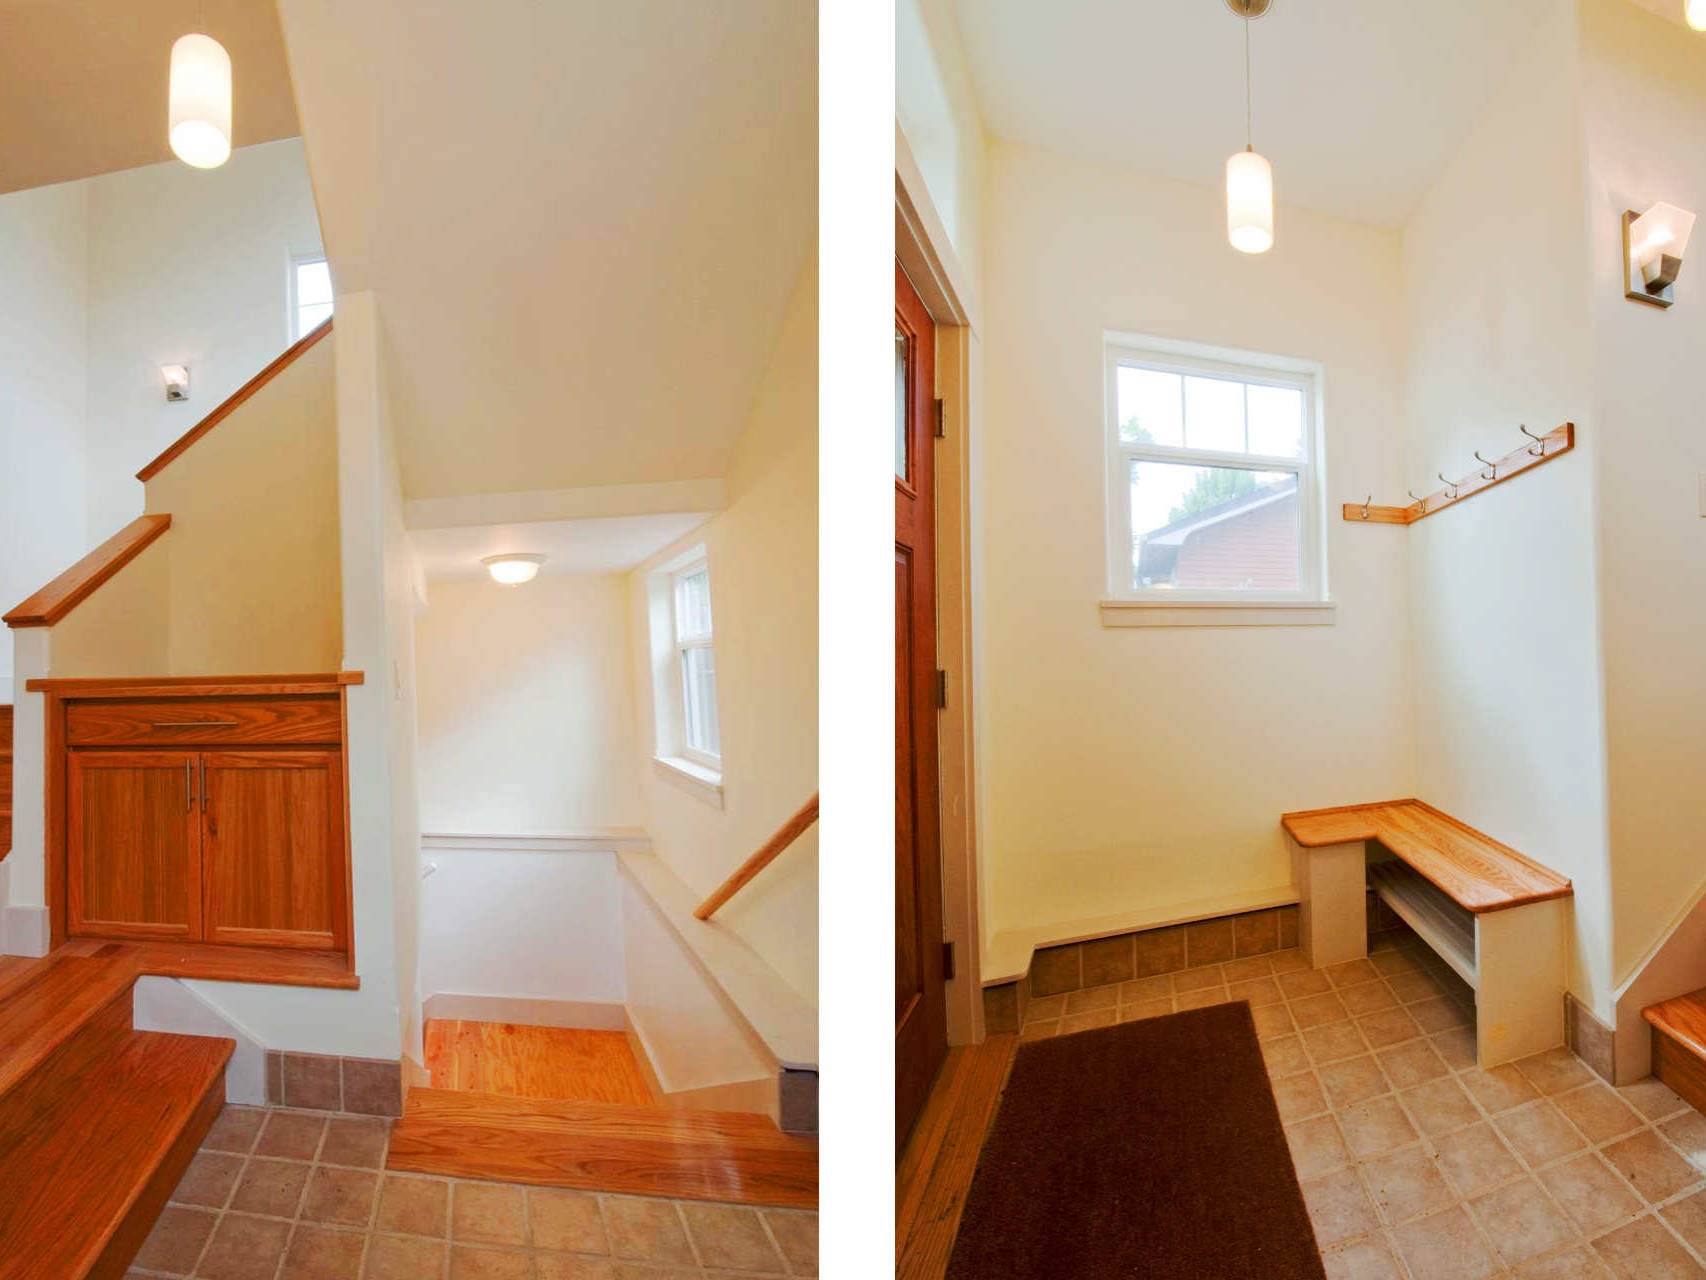 Stair to basement and second floor , mudroom